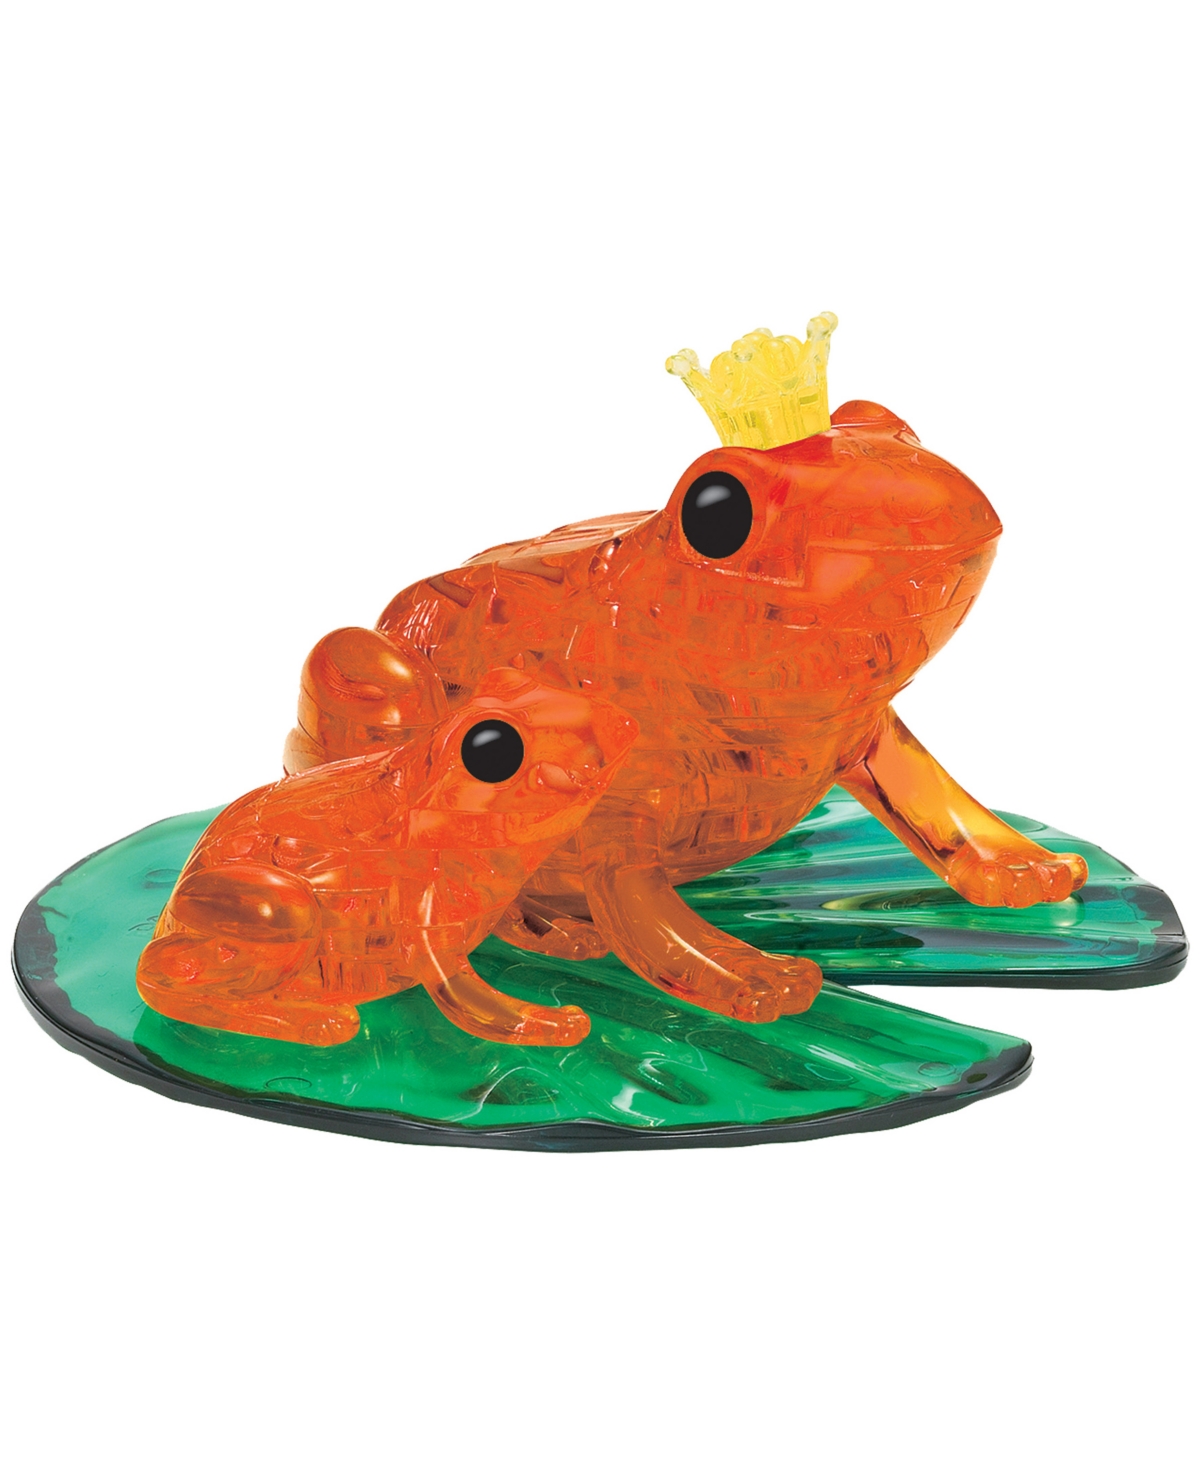 University Games Kids' Bepuzzled 3d Crystal Puzzle Frog, 43 Pieces In No Color